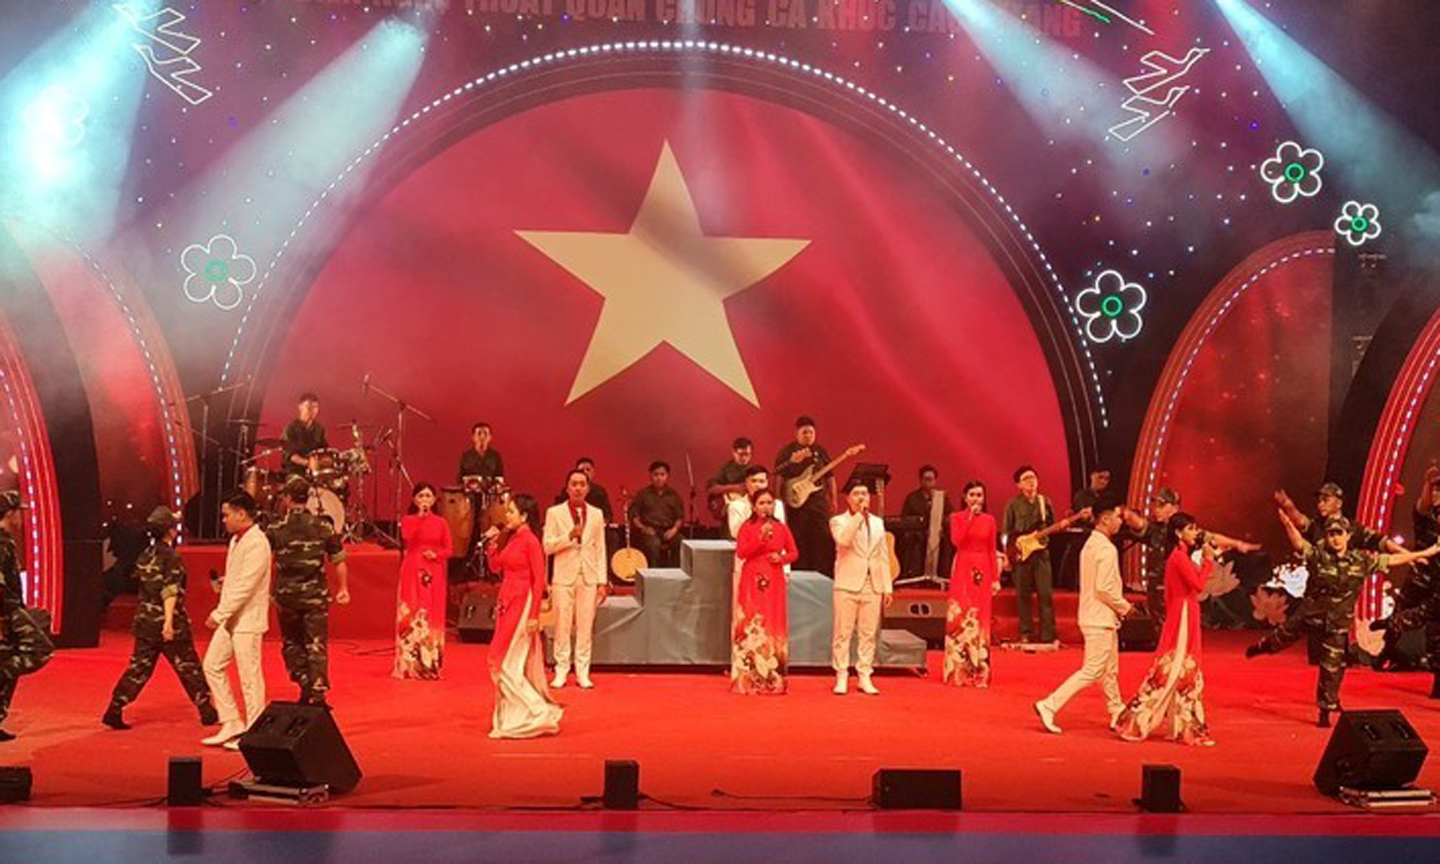 A performance at the opening ceremony.